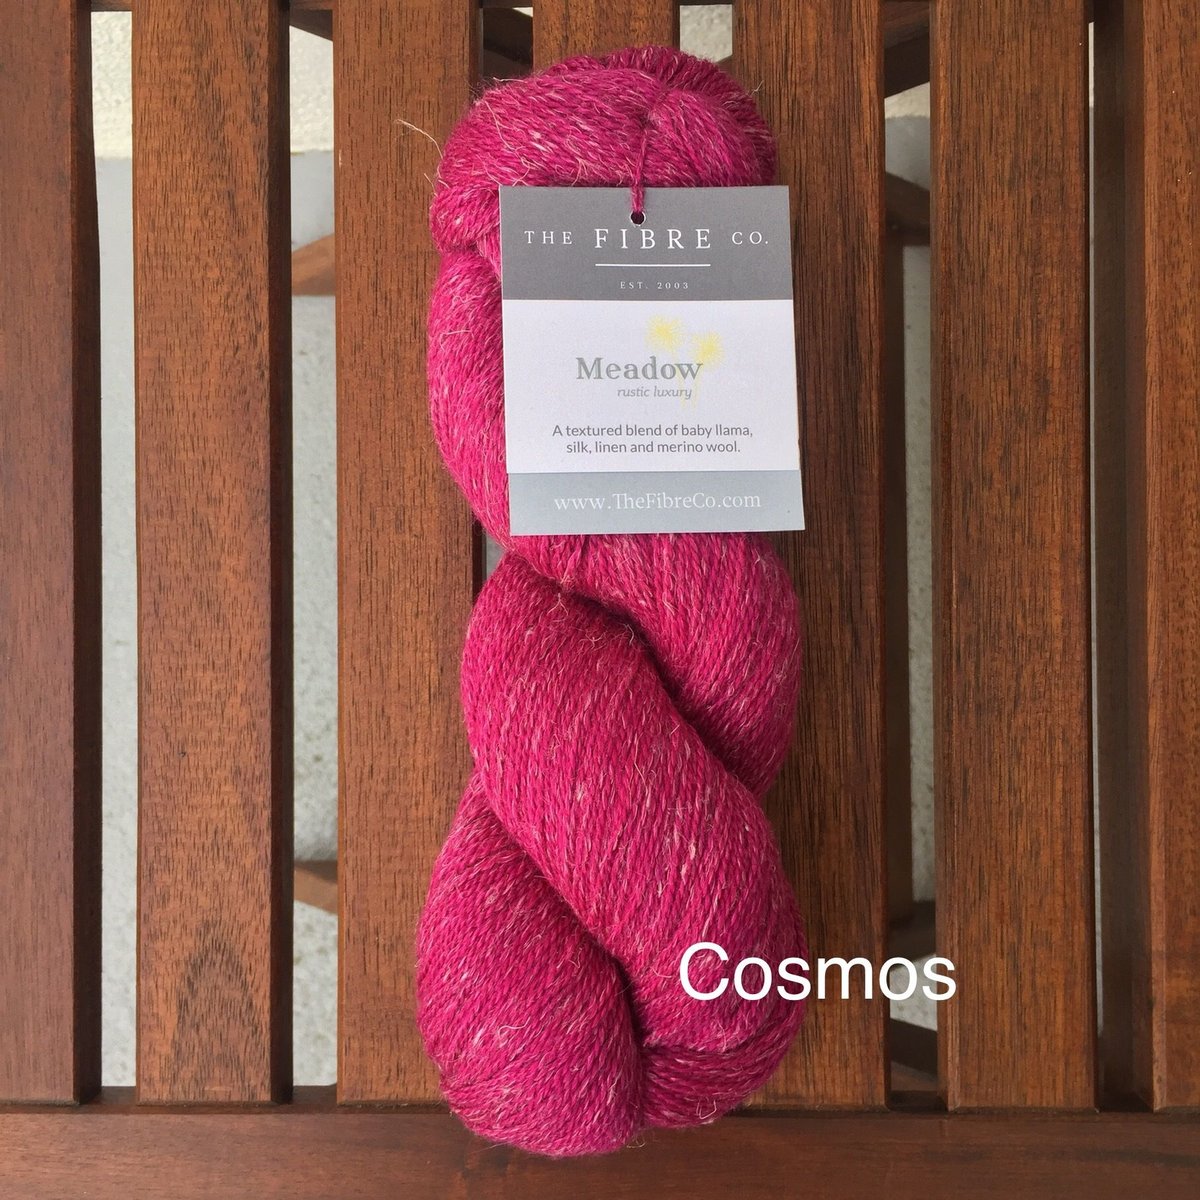 Meadow by The Fibre Co 【店舗発送】 | EYLUL yarns